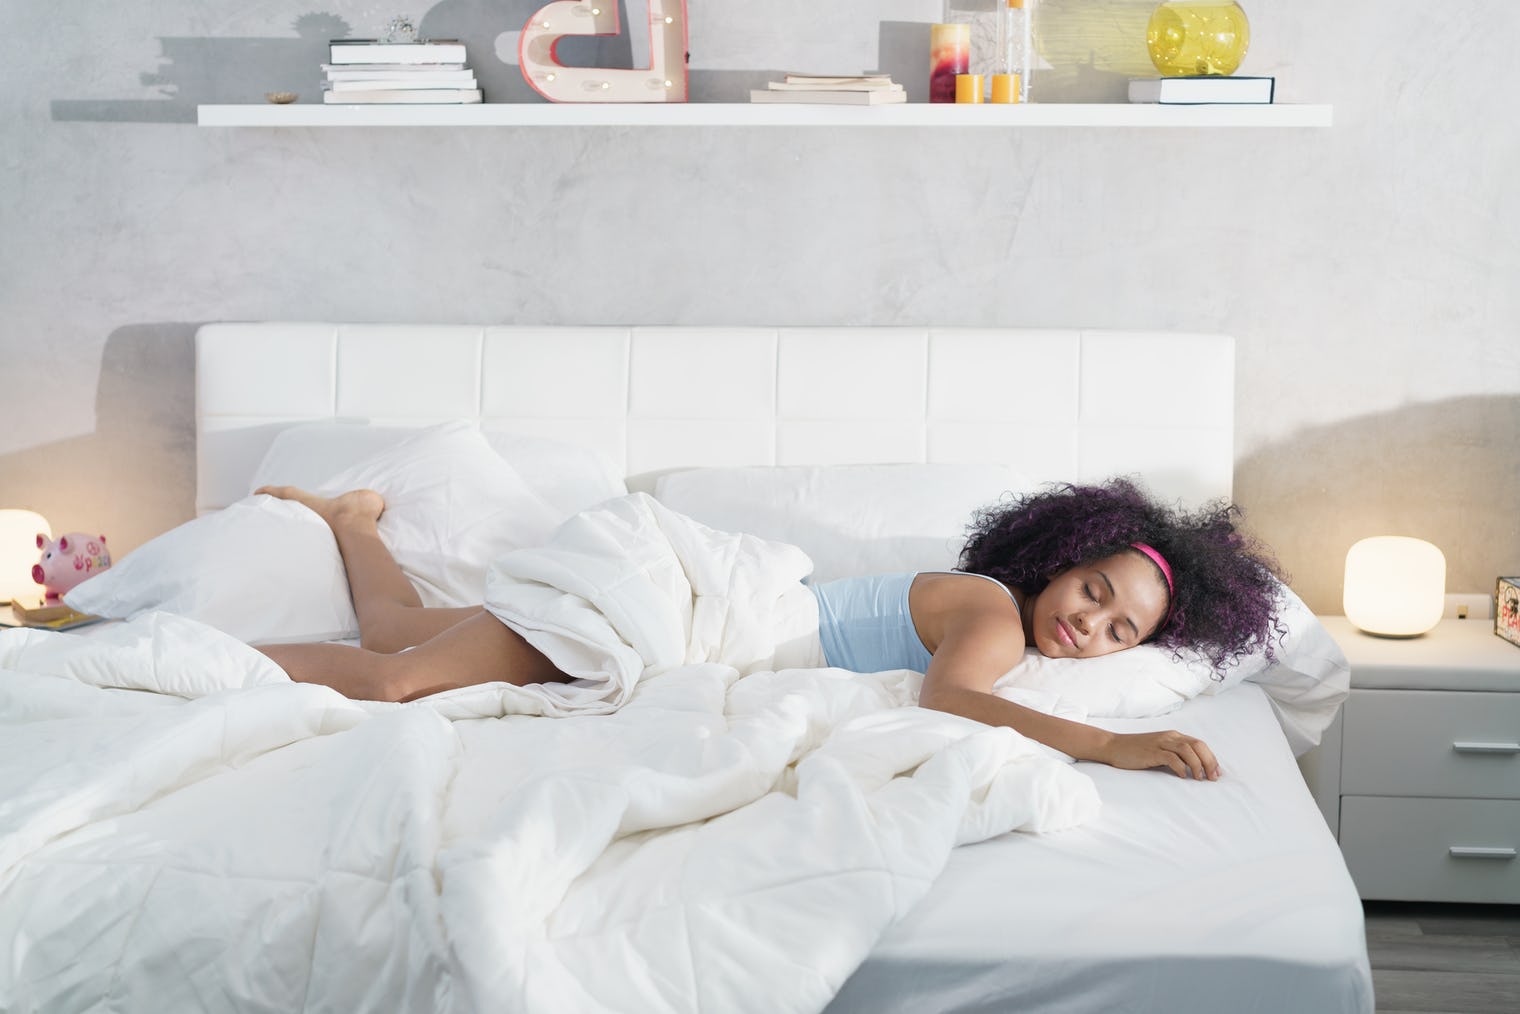 Does Your Mattress Affect Sleep Quality? Experts Sound Off